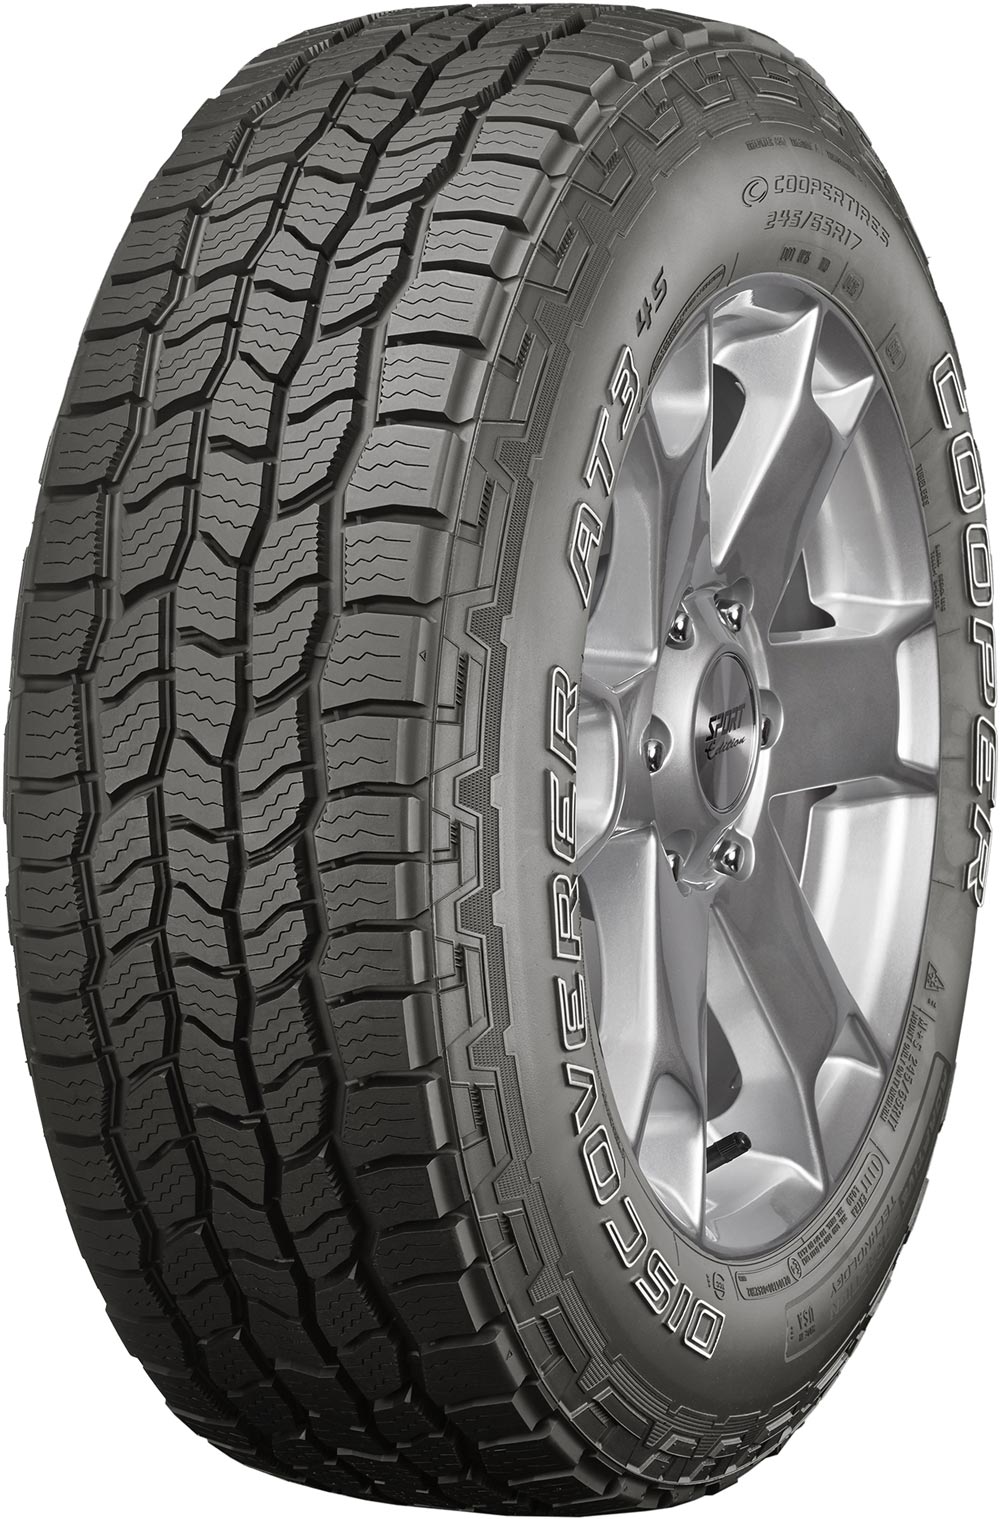 Гуми за джип COOPER DISCOVERER AT3 4S OWL 255/70 R18 113T